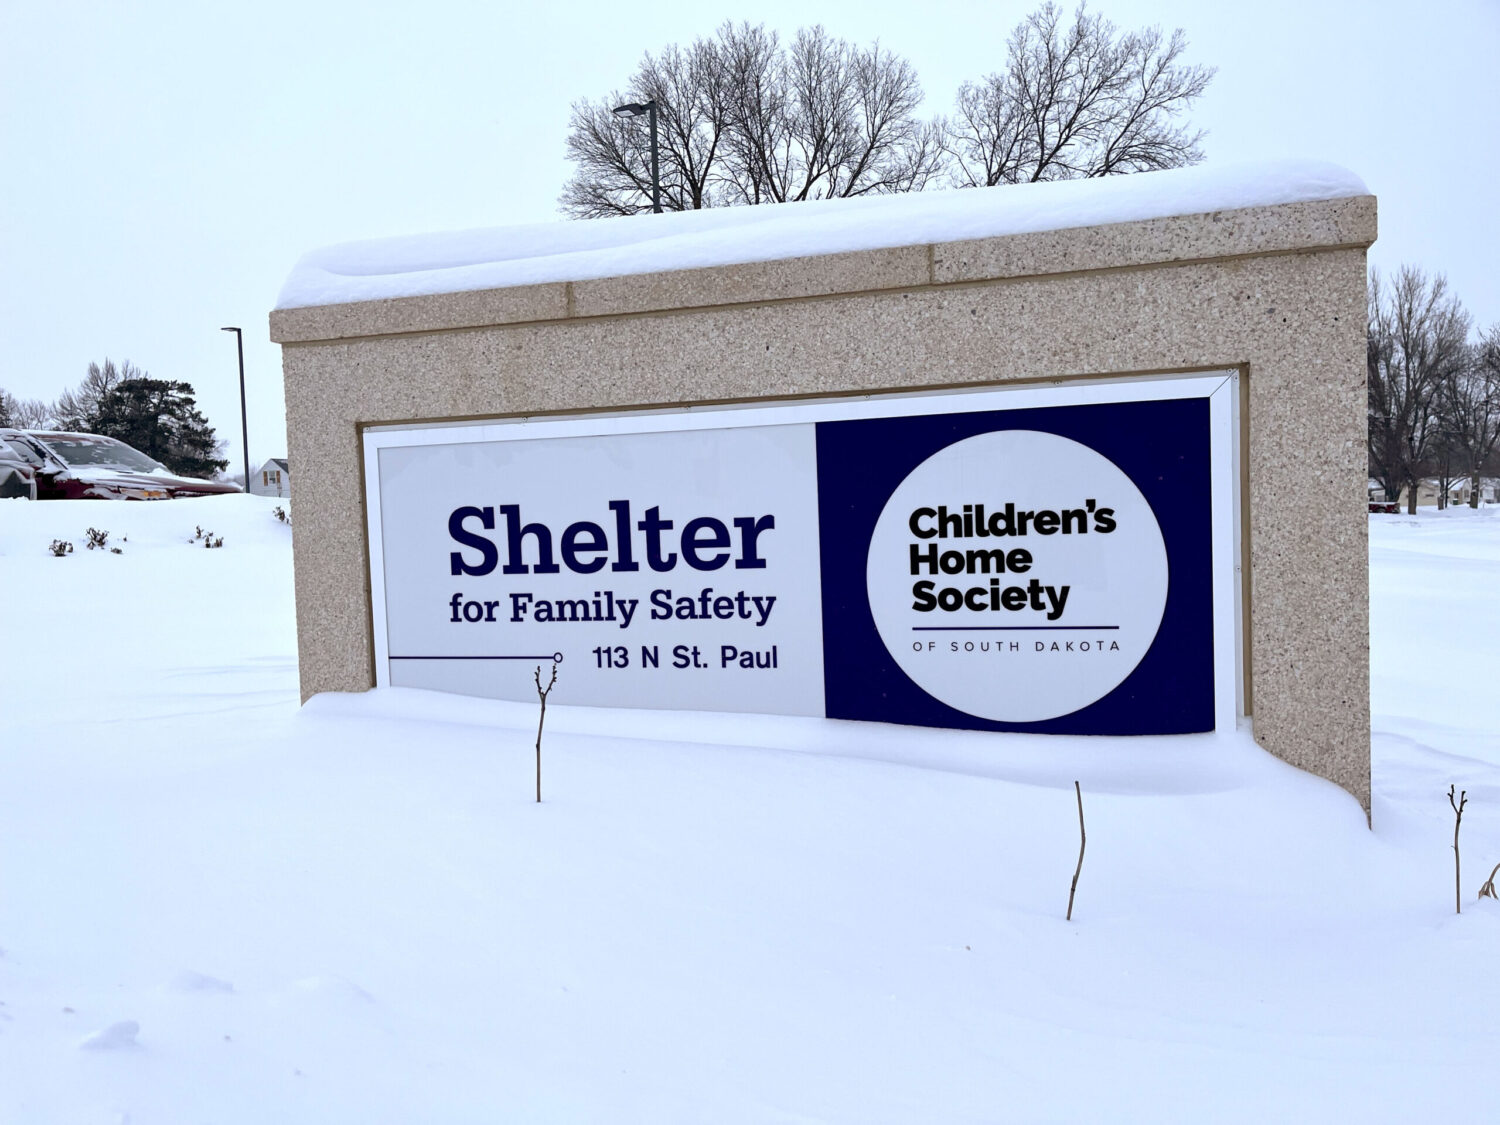 The Children's Home Shelter for Family Safety is located in northeast Sioux Falls. The shelter serves primarily the Sioux Falls area and surrounding counties. (Makenzie Huber/South Dakota Searchlight)